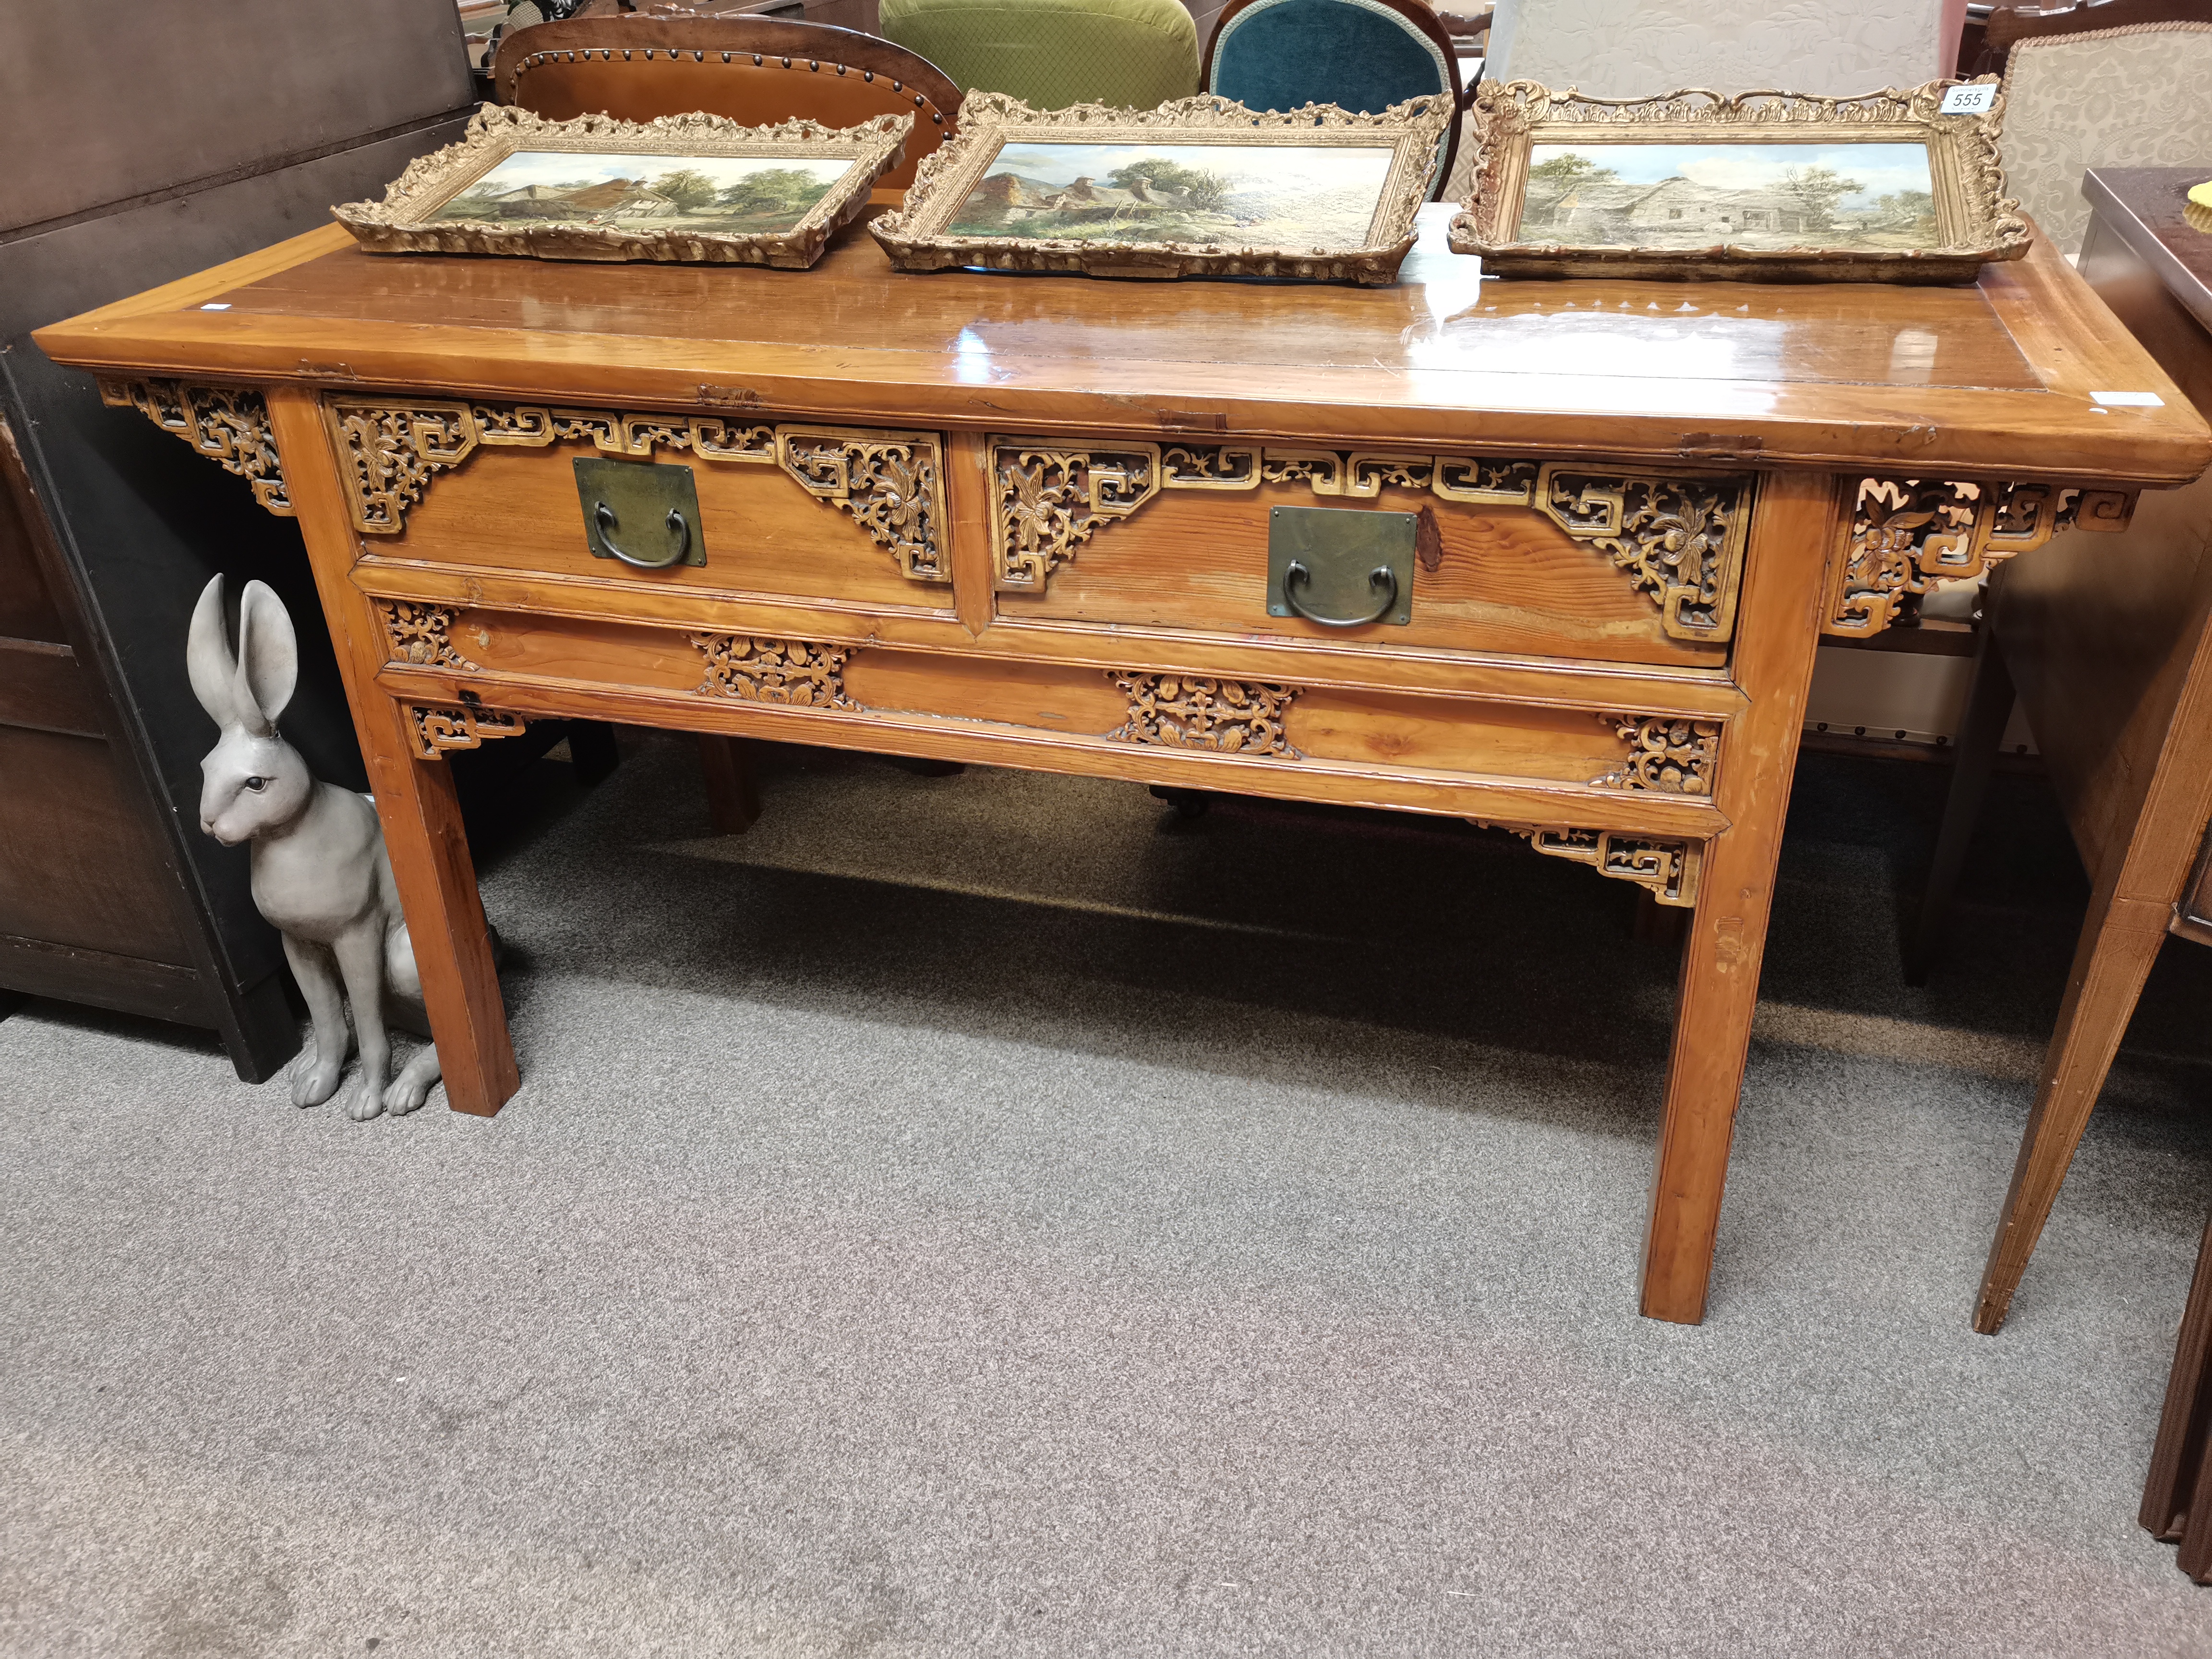 An large antique style Chinese pine altar table or sideboard